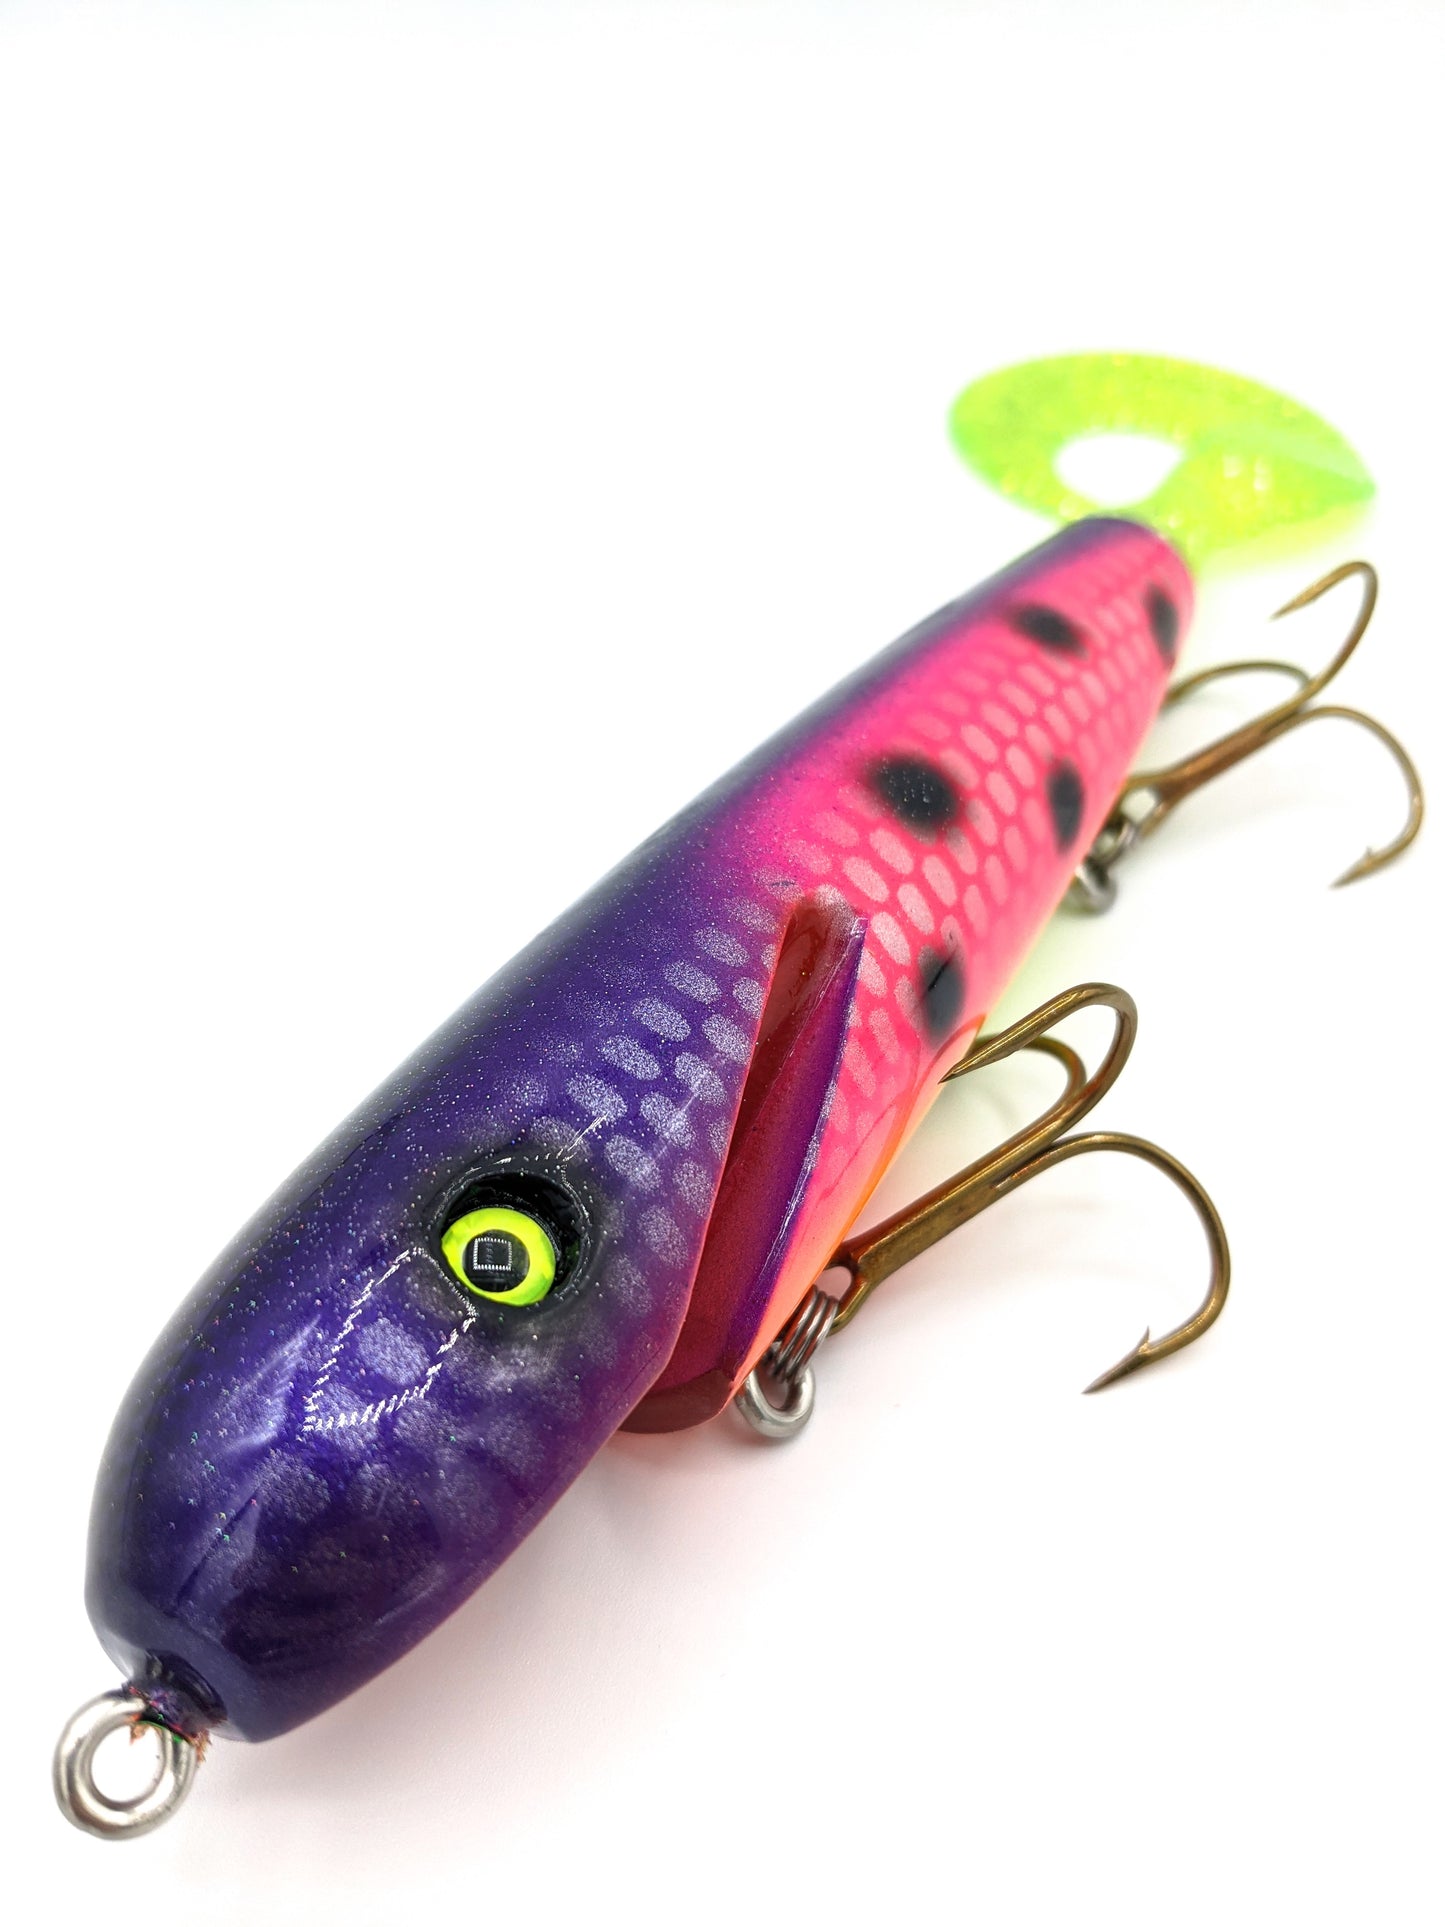 Leo Lures 6 Jerkbait Rubber Tail Gizzard Shad